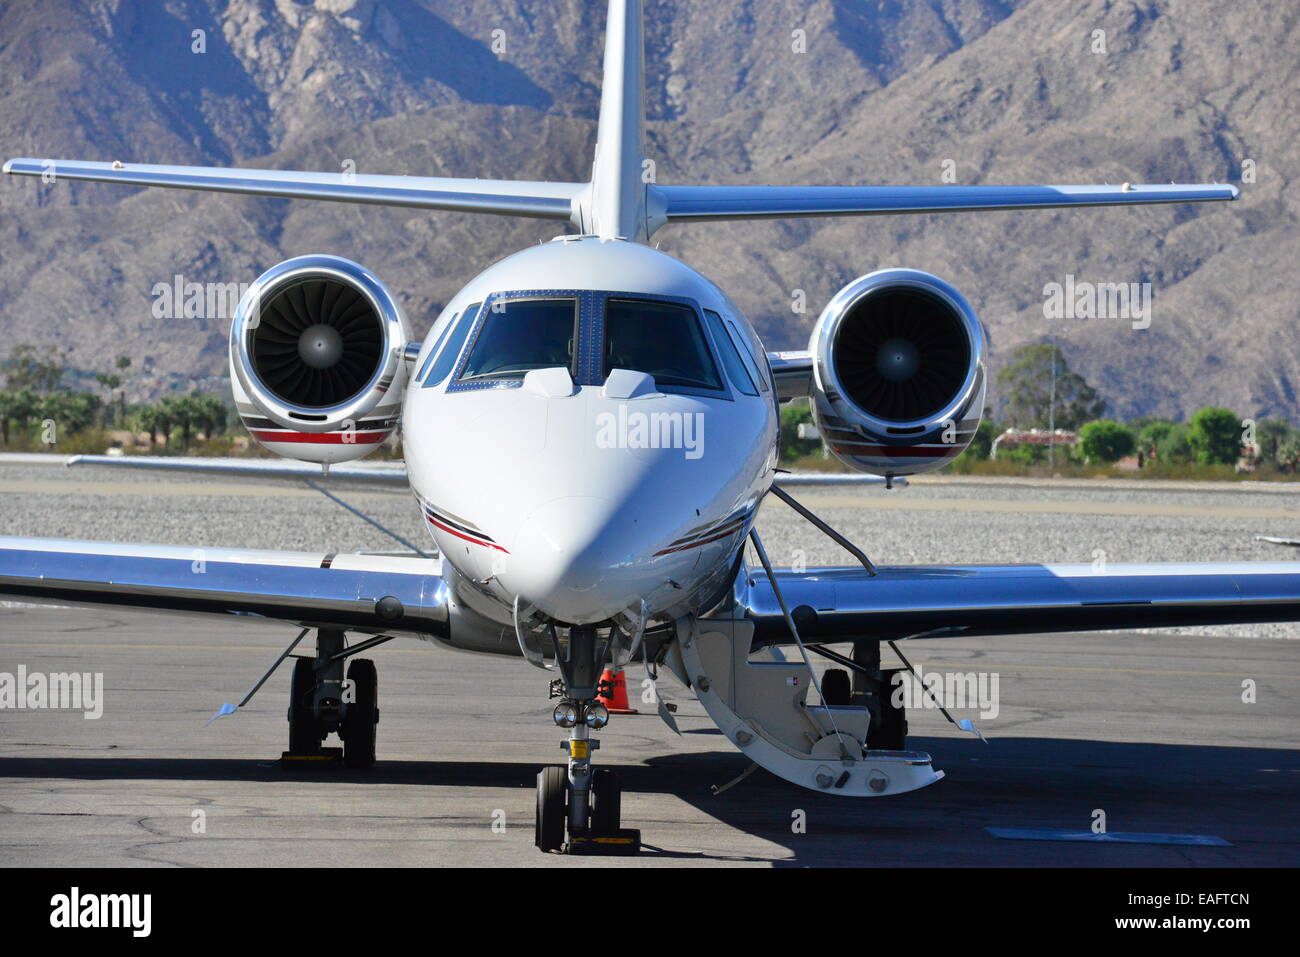 Executive Jets at Palm Springs airport Stock Photo